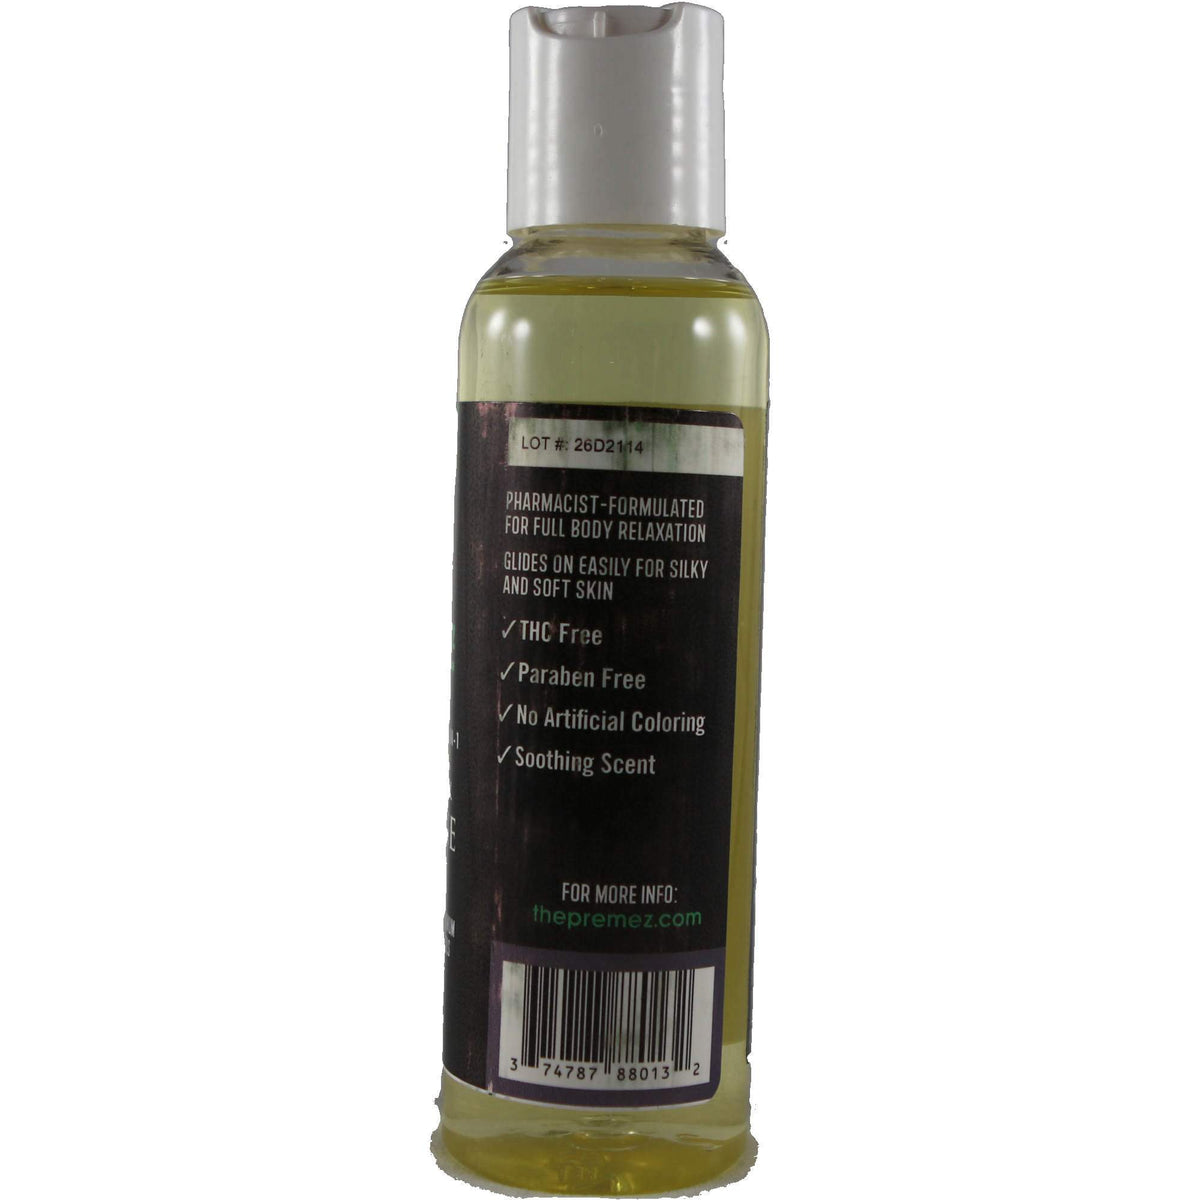 Body and Massage Oil